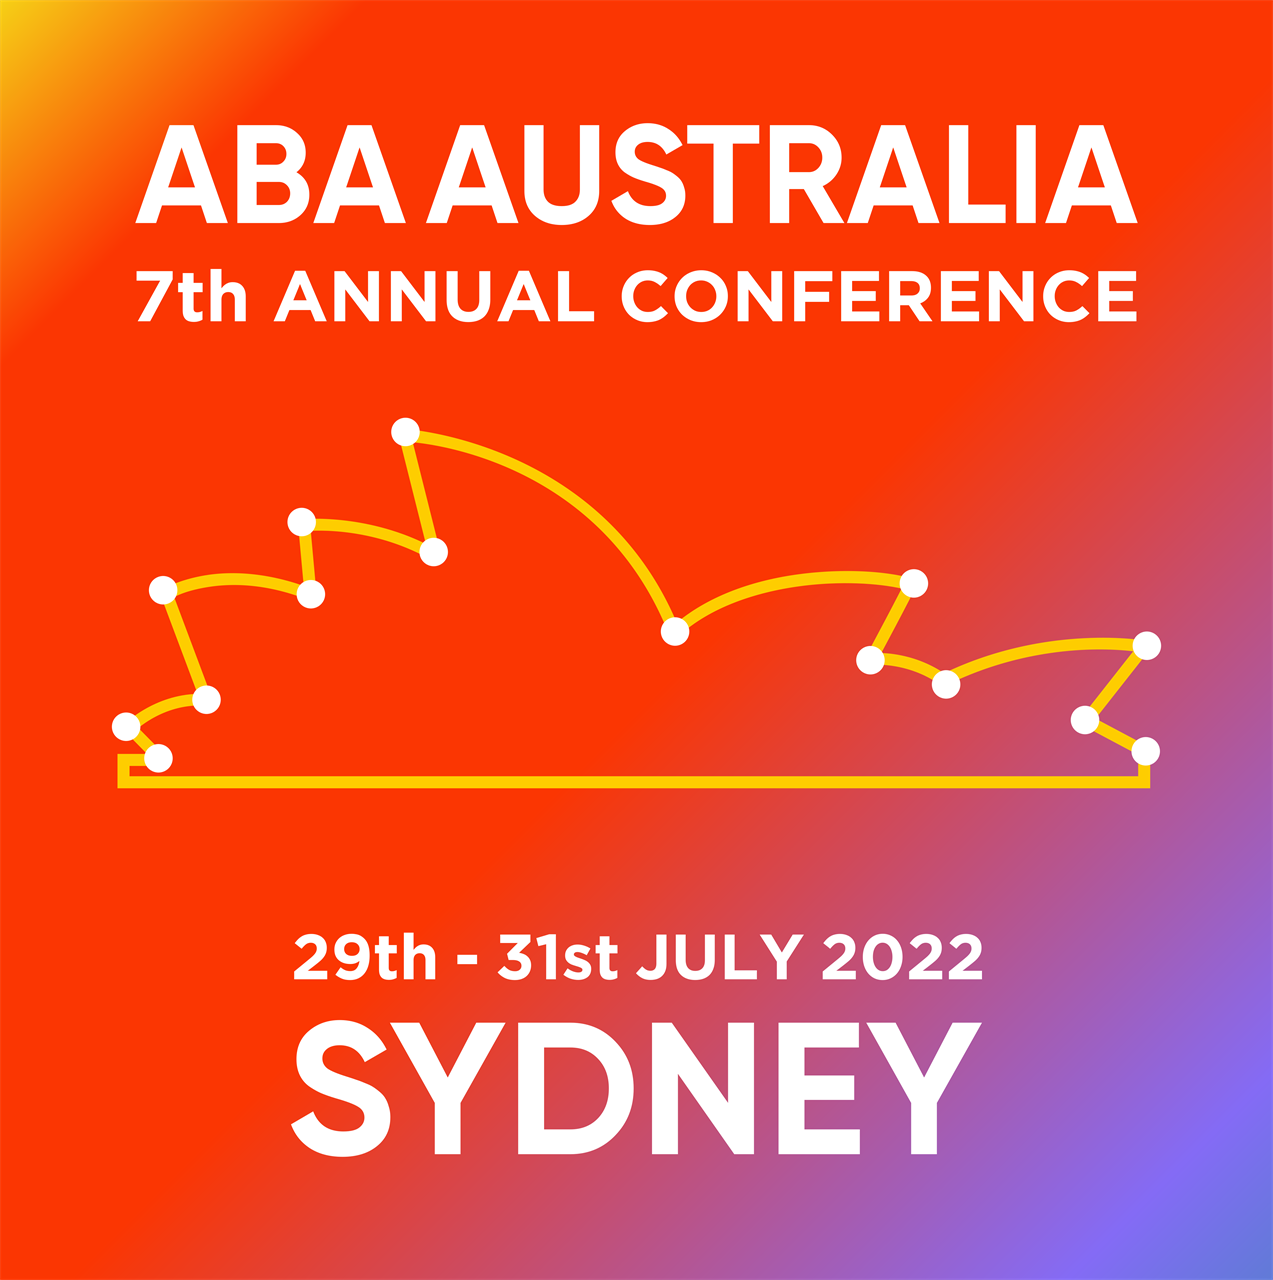 ABA Australia 2022 conference - 29th July to 31st July 2022